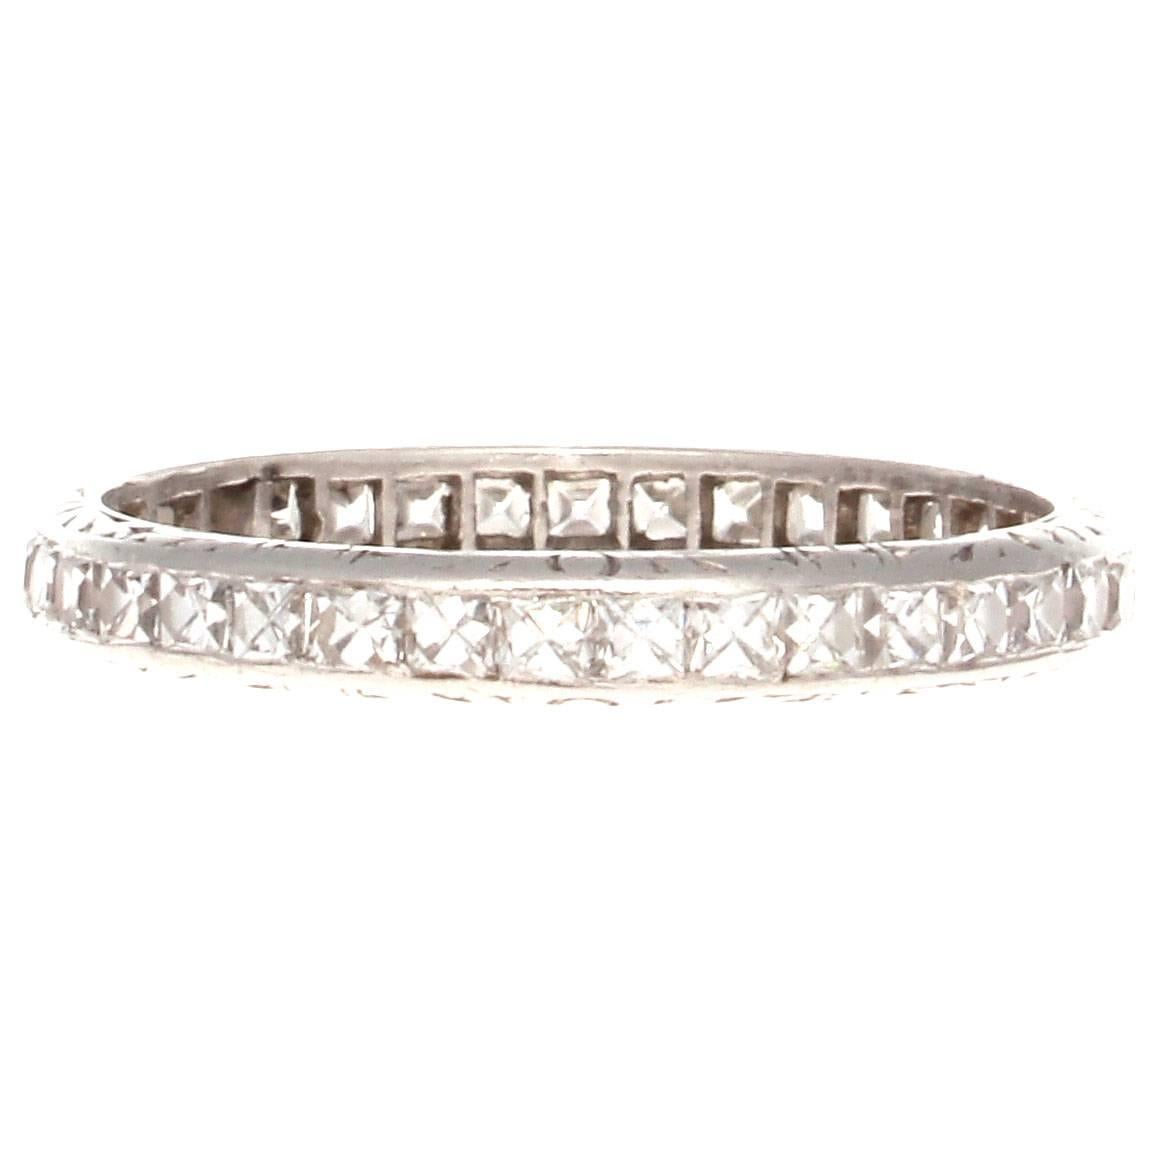 A timeless elegance radiates from this diamond platinum eternity band. Featuring perfectly matching white, clean french cut diamonds weighing approximately 1.10  carats which are perfectly channel set in the filigree platinum ring. 

Ring size 7.